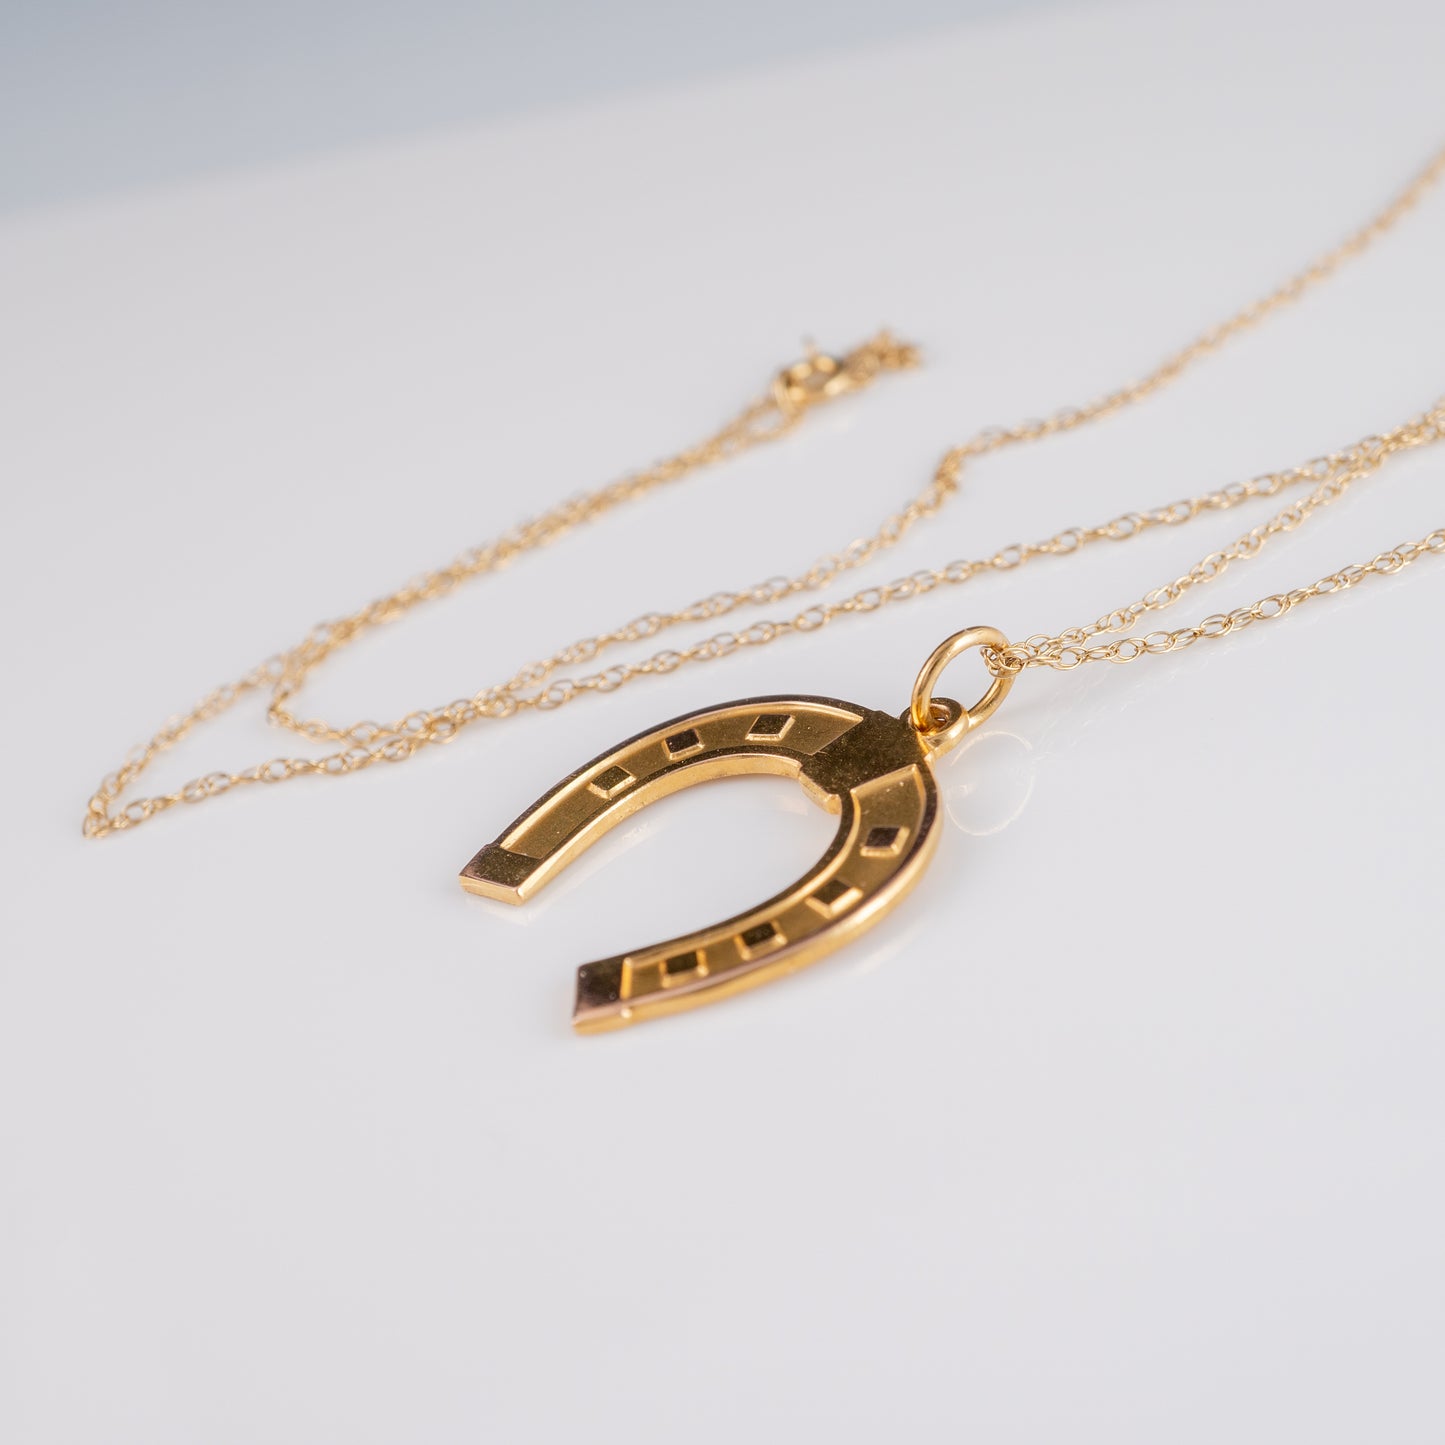 Vintage 9ct Gold Horseshoe Pendant With Fancy Link Chain - Hunters Fine Jewellery